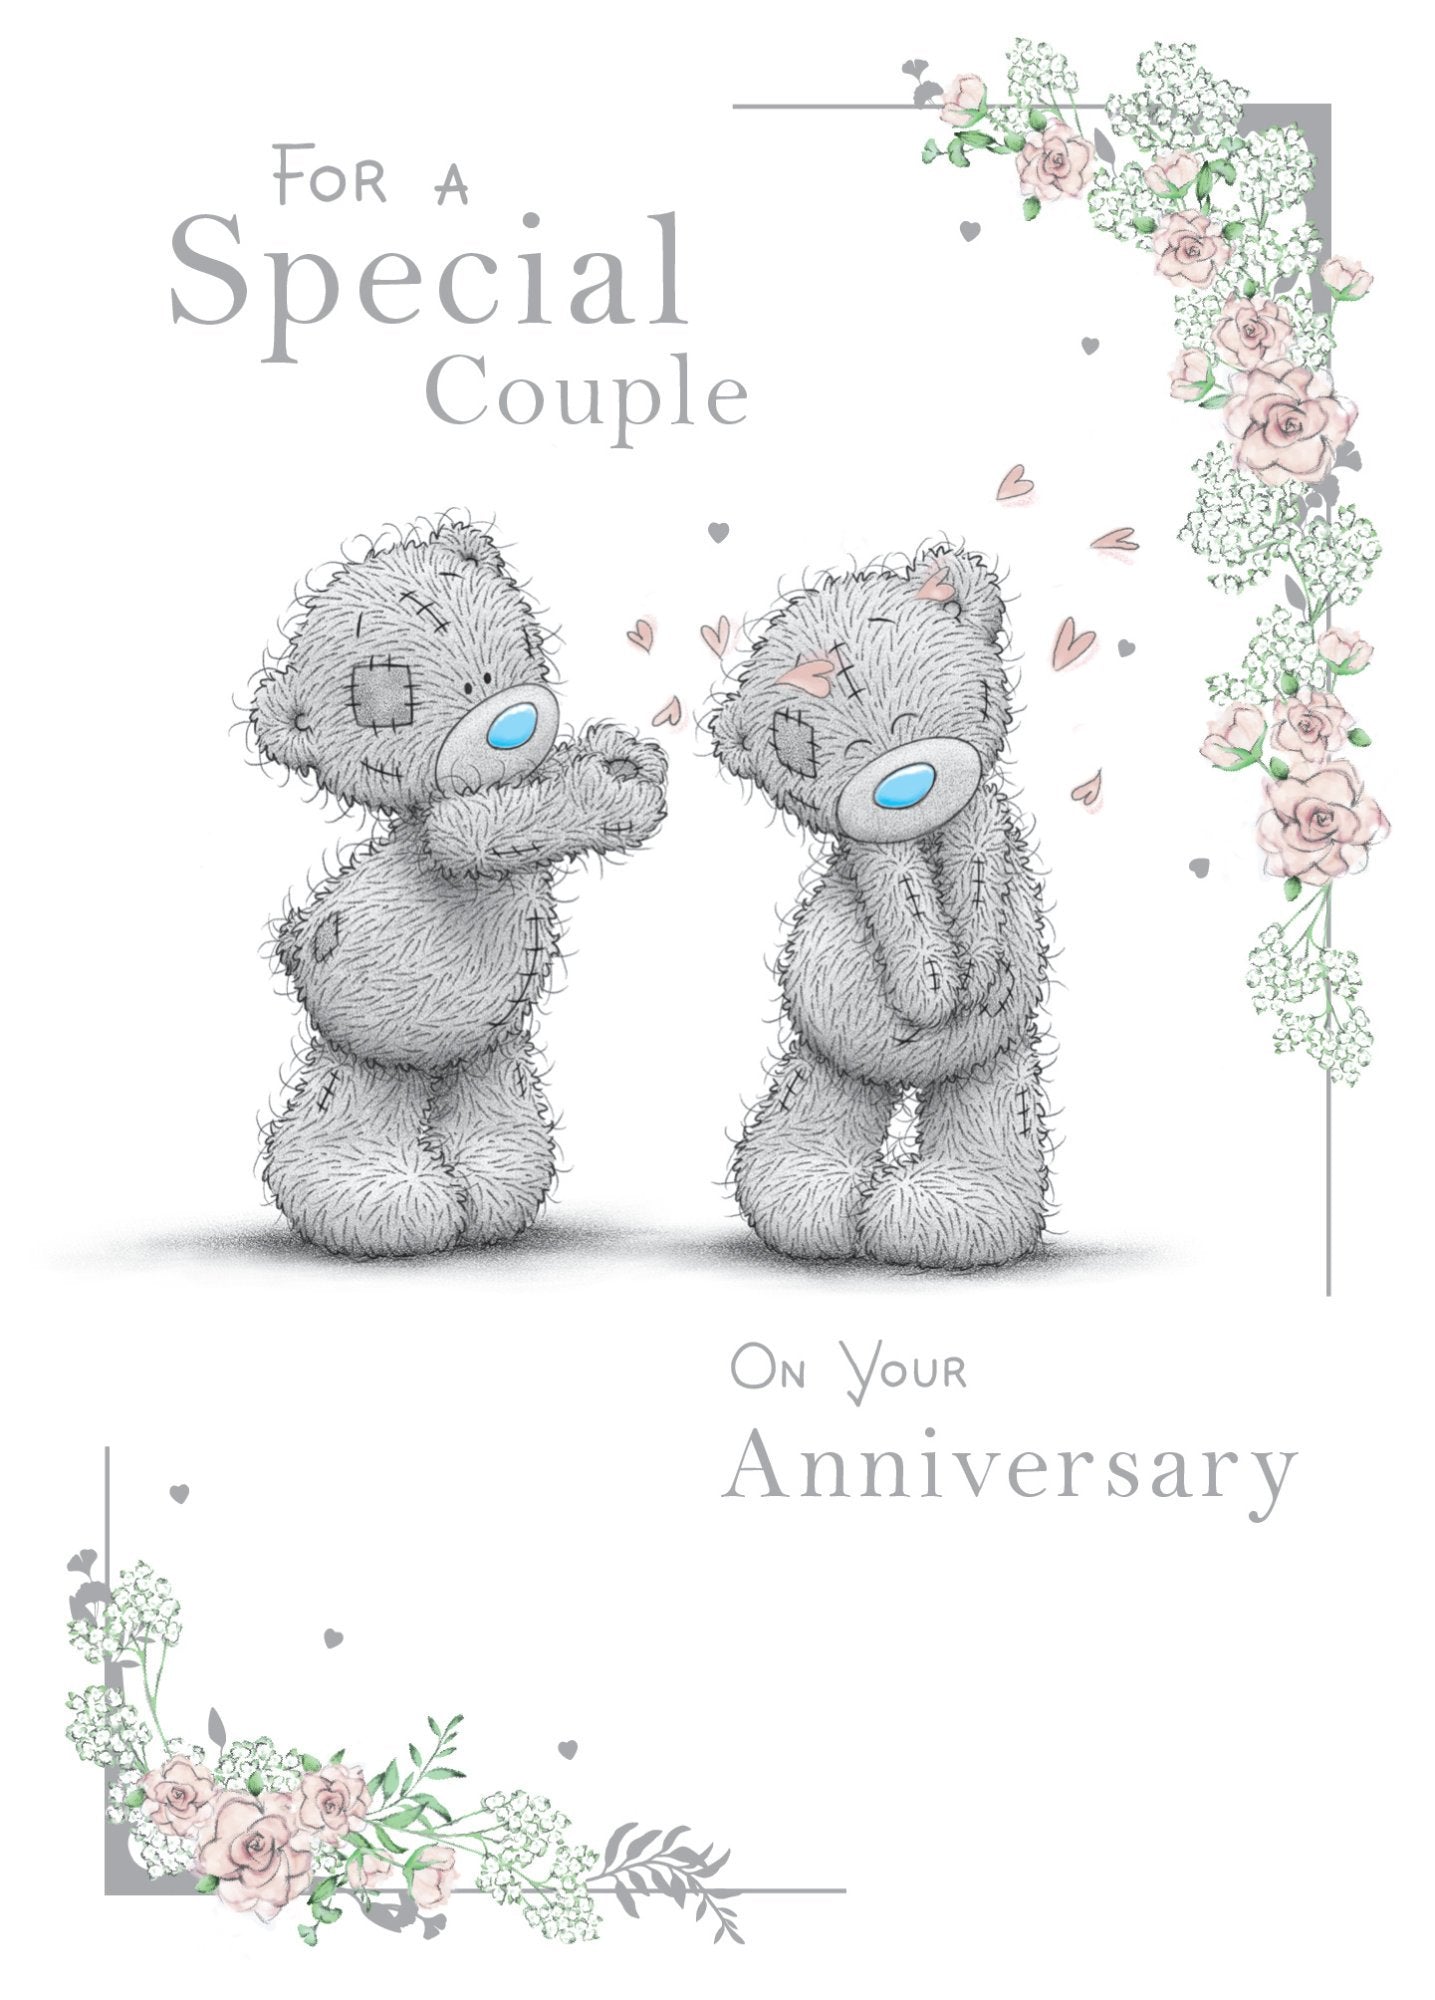 Photograph of Anniversary Special Couple Cuties Greetings Card at Nicole's Shop